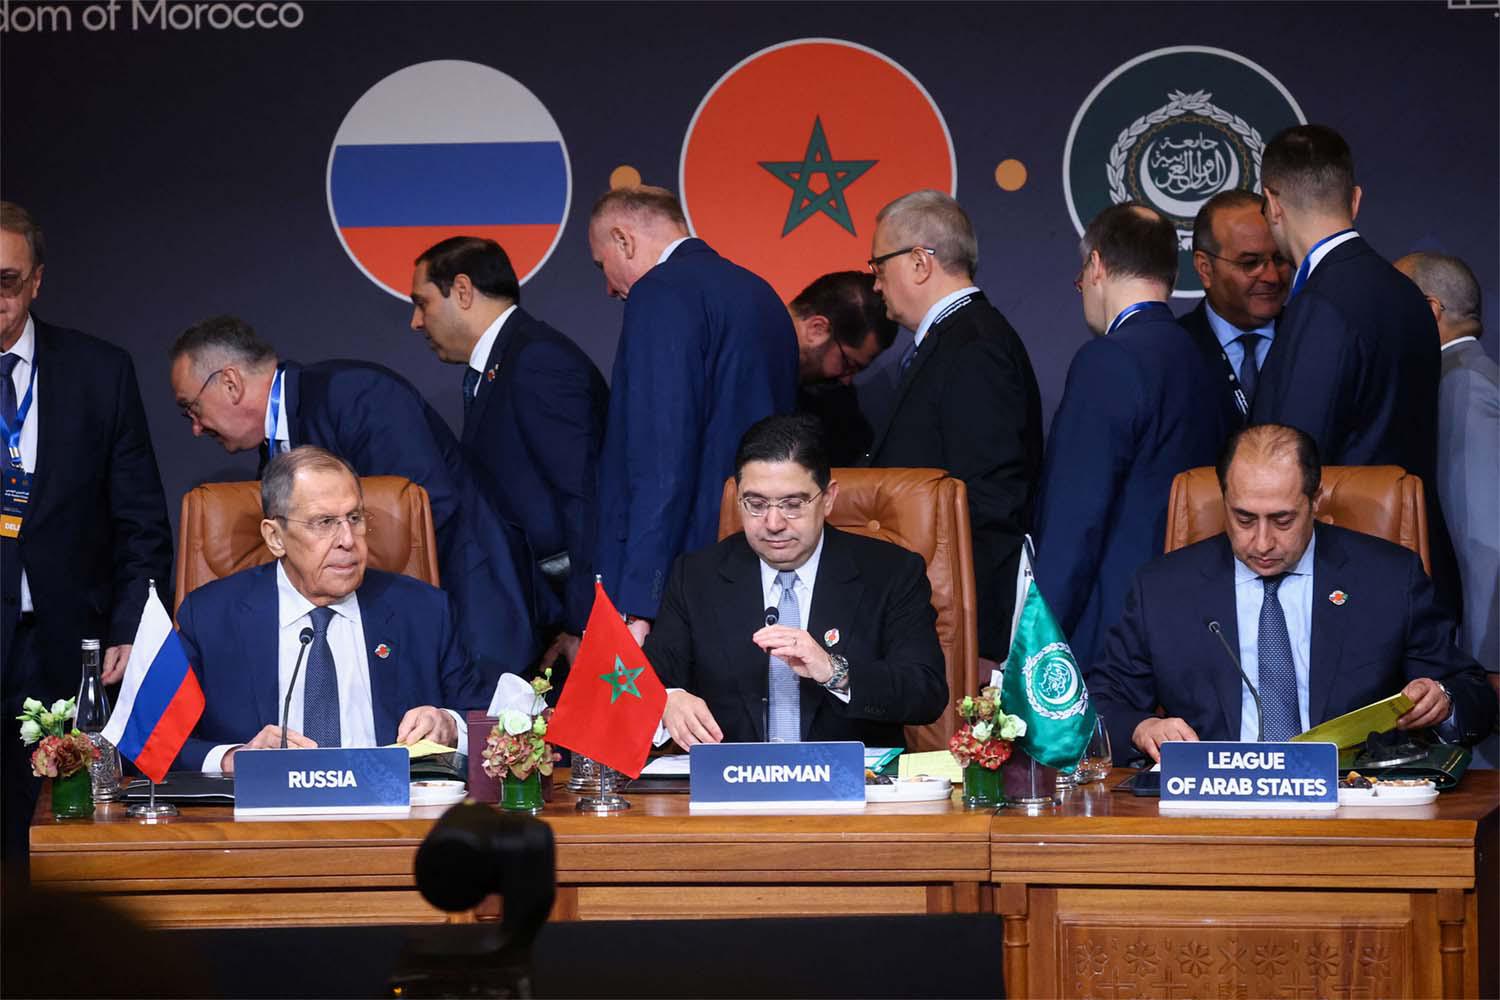 Morocco is Russia's third economic and commercial partner in Africa